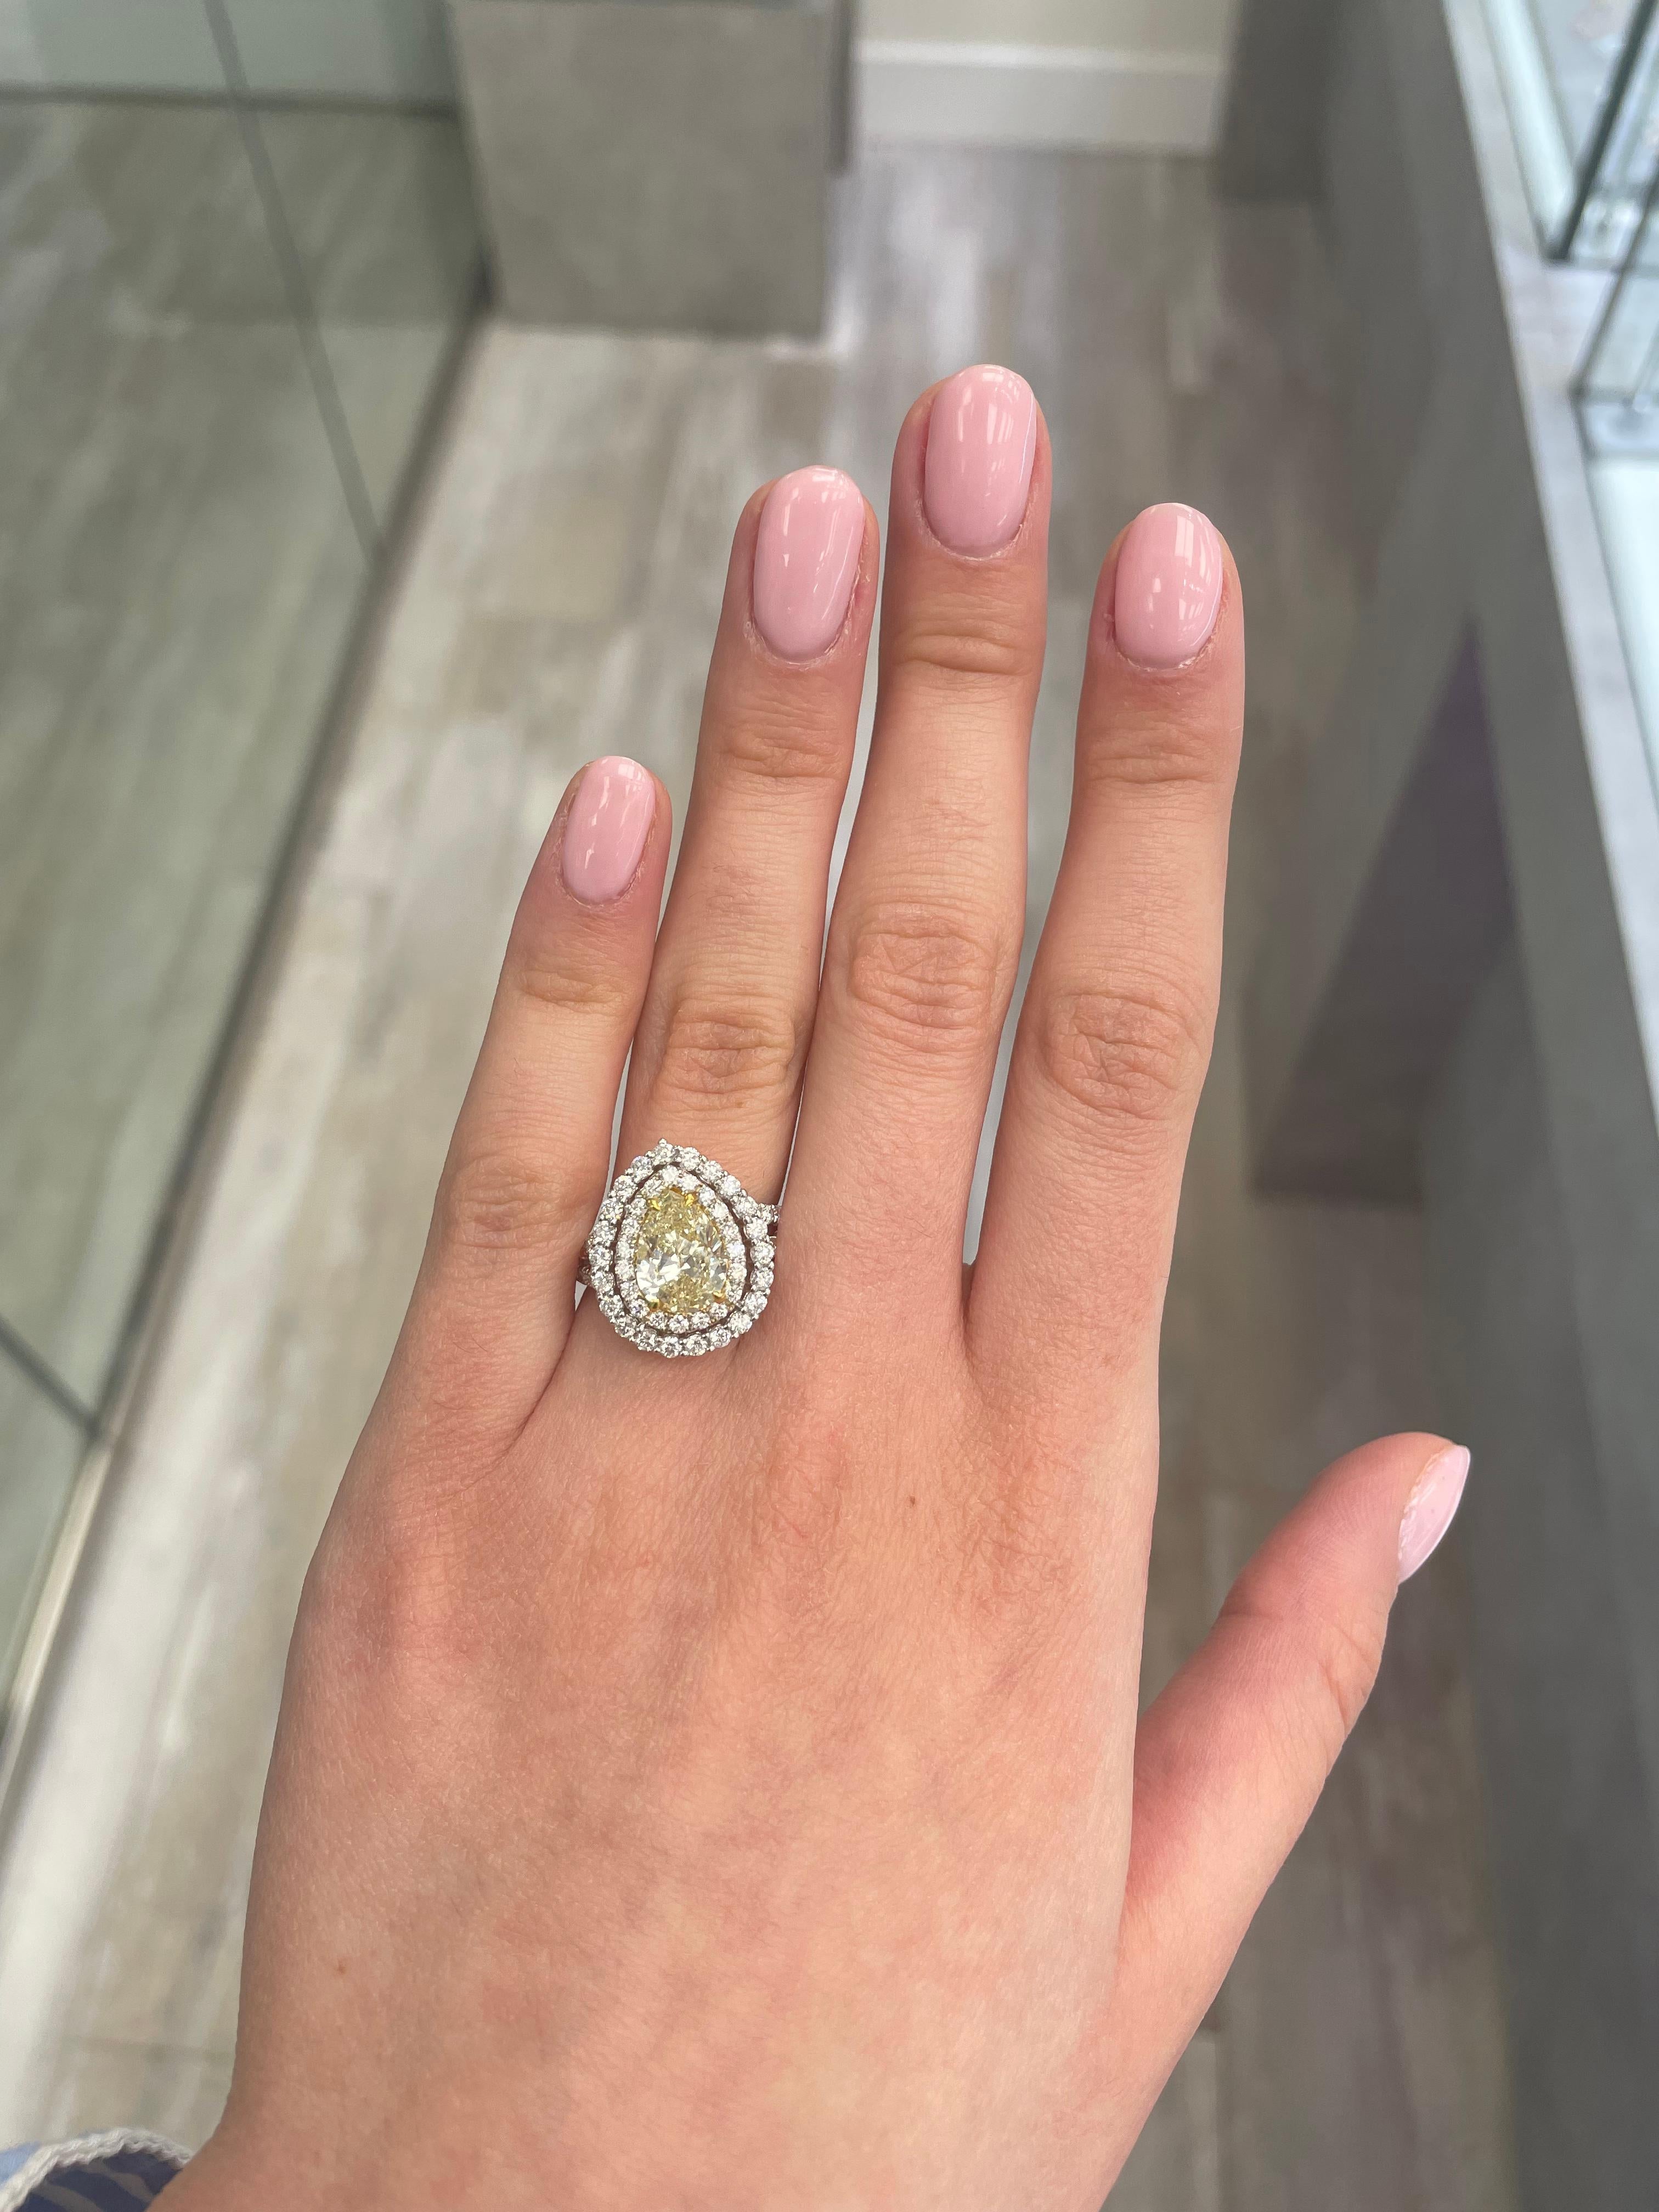 Stunning modern EGL certified yellow diamond double halo ring, two-tone 18k yellow and white gold. By Alexander Beverly Hills
3.32 carats total diamond weight.
2.01 carat pear cut Fancy Yellow color and SI2 clarity diamond, EGL graded in the